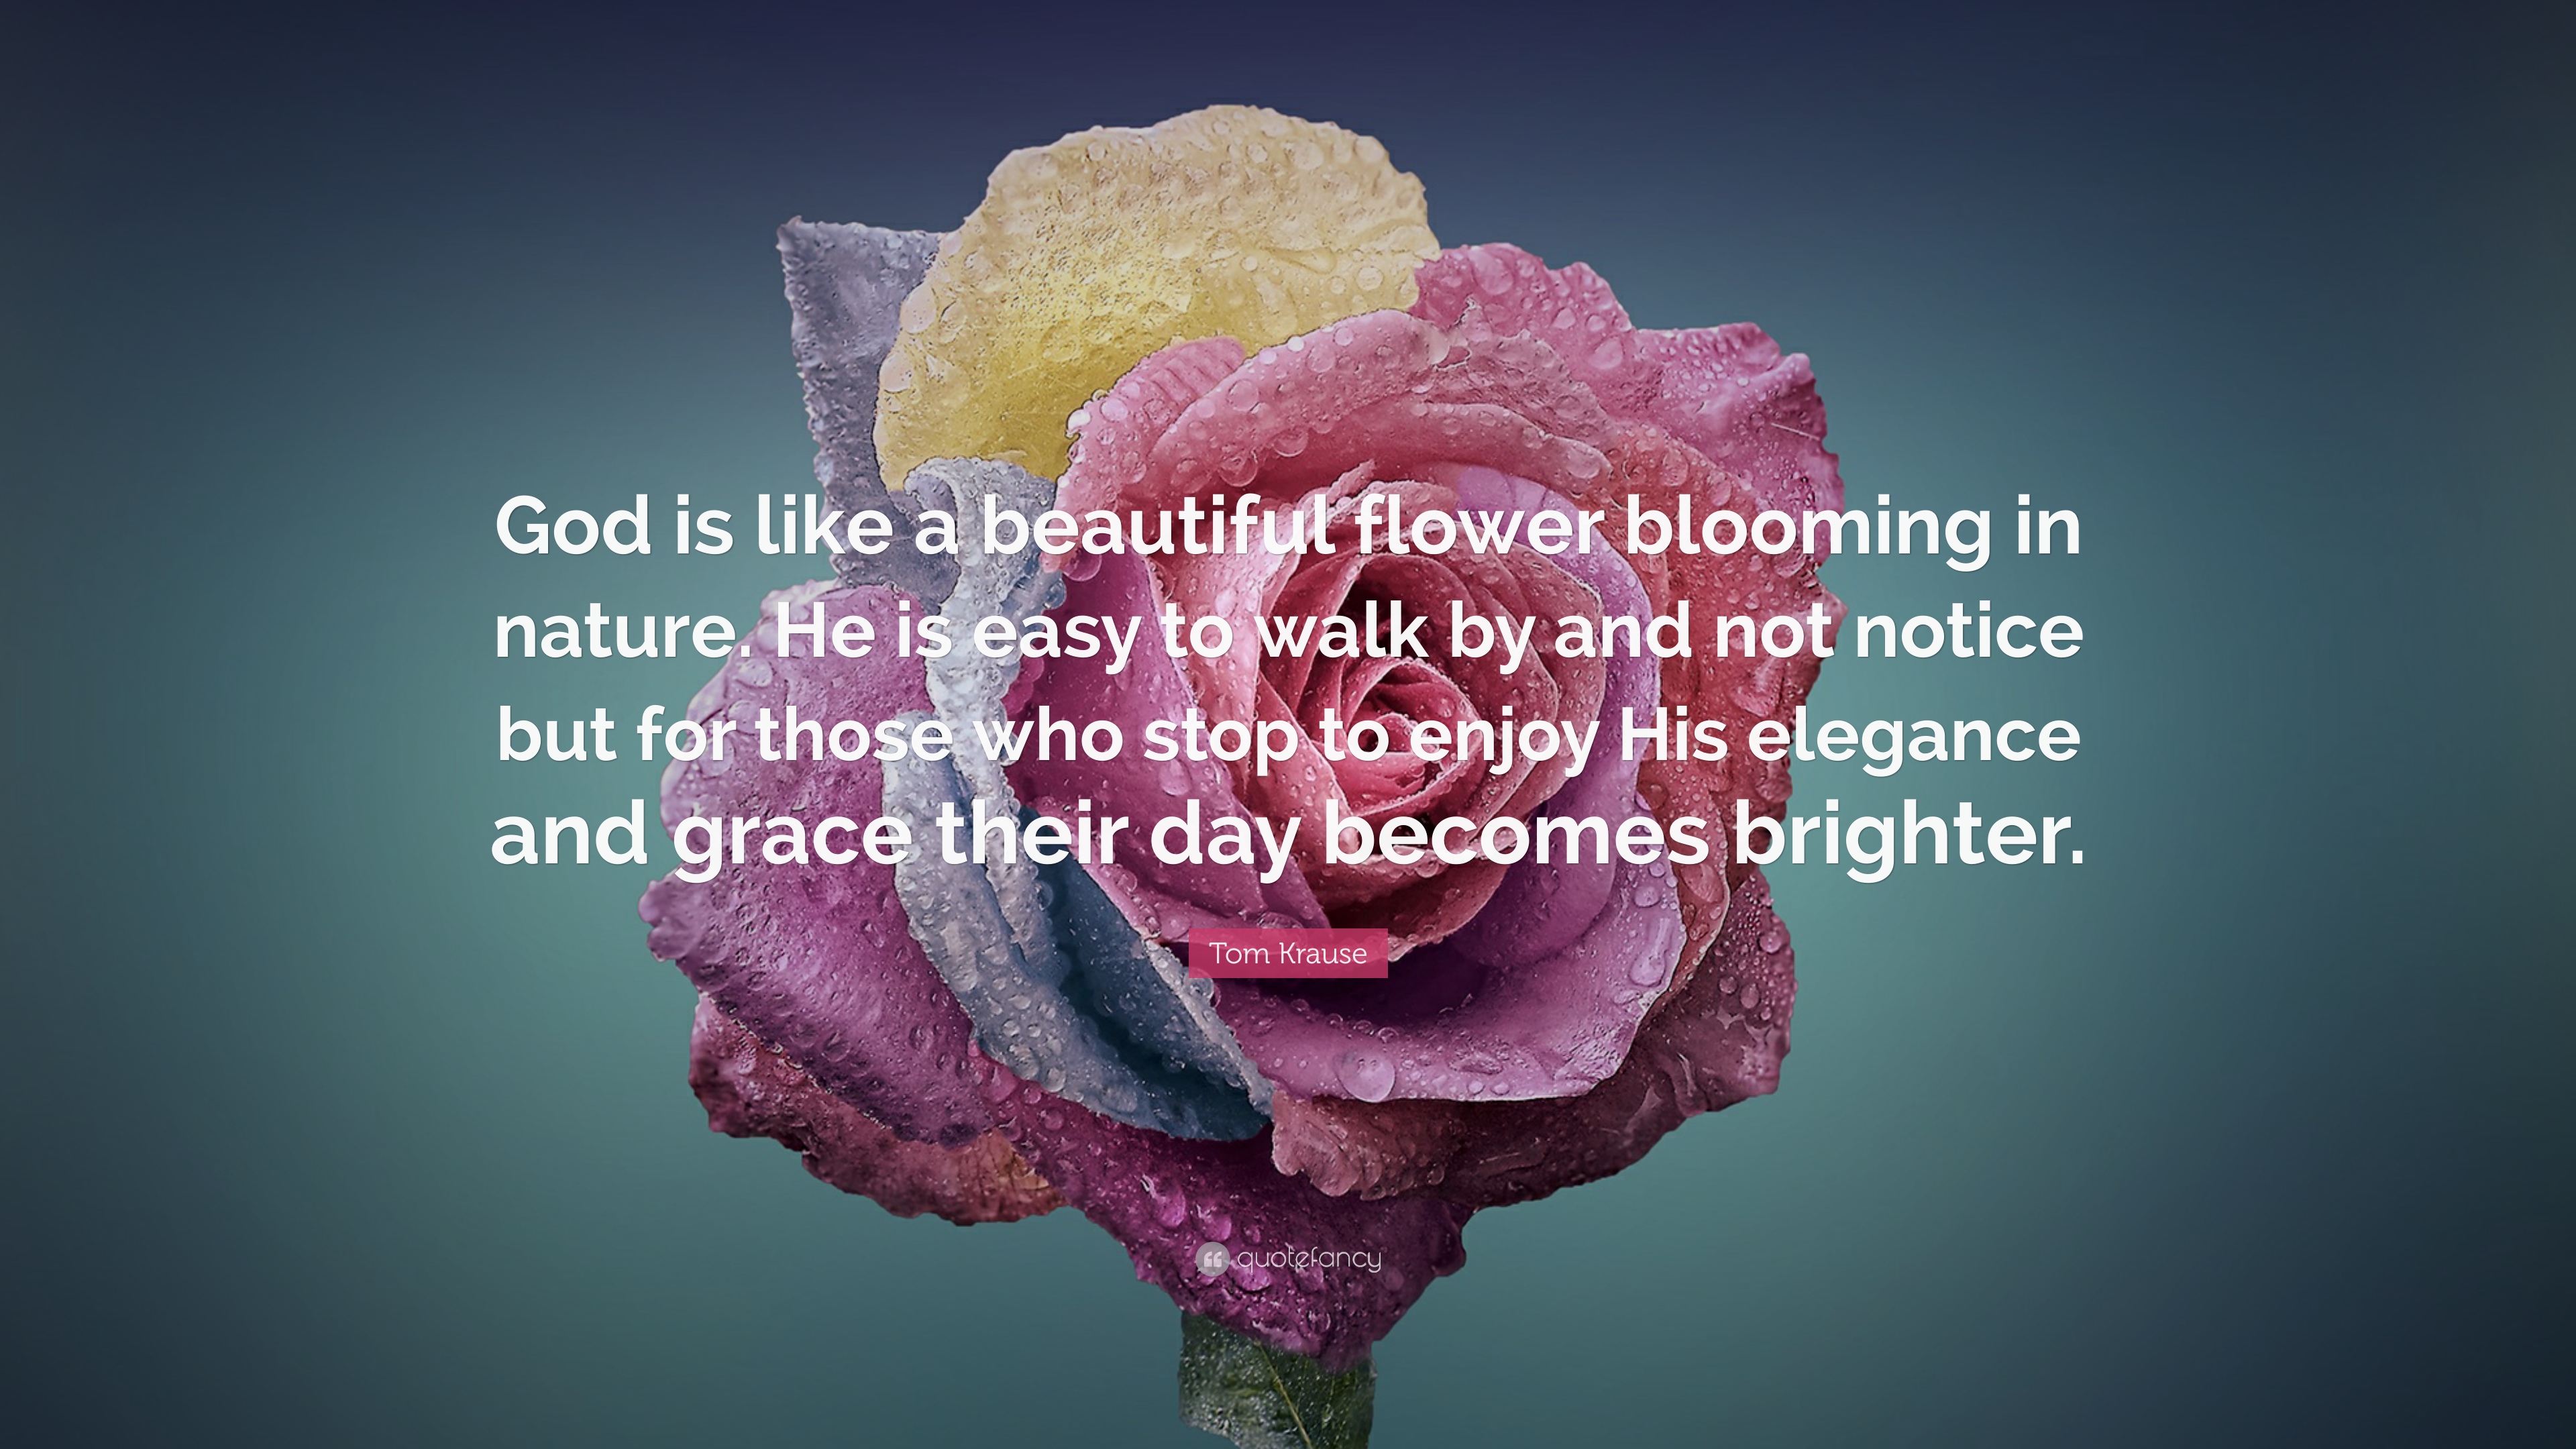 Tom Krause Quote: “God is like a beautiful flower blooming in nature ...